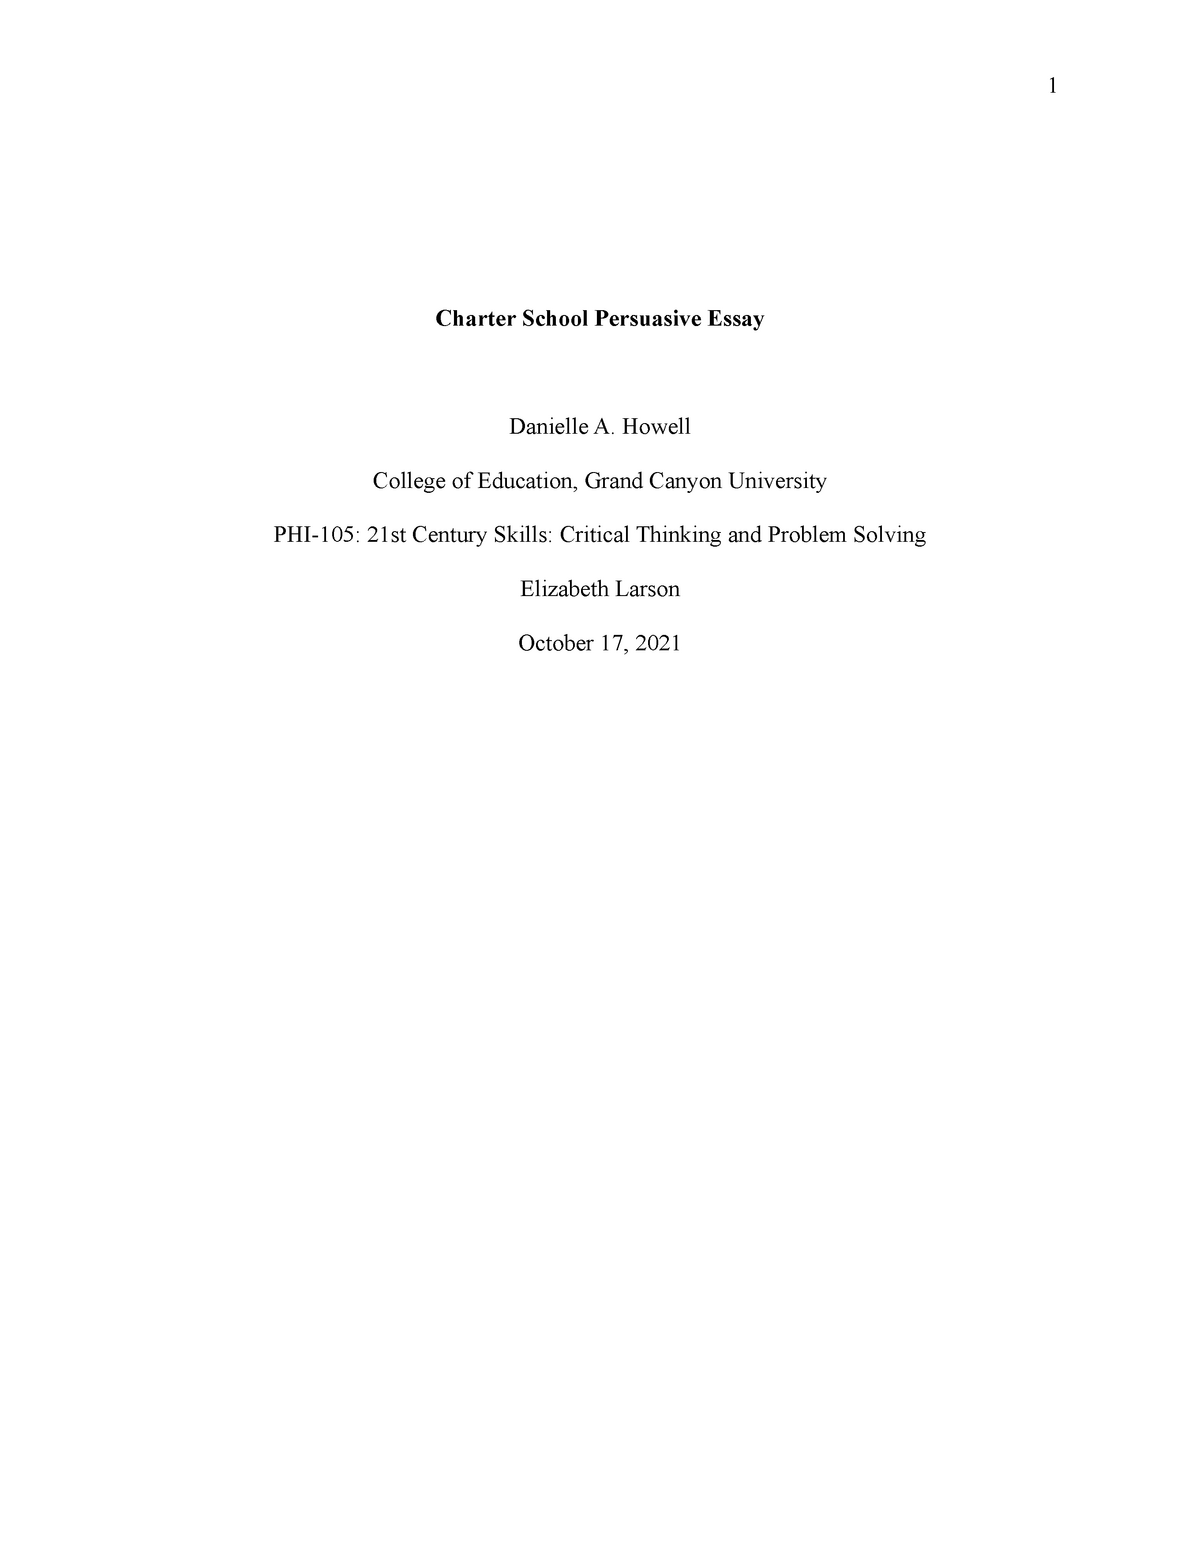 thesis about charter schools